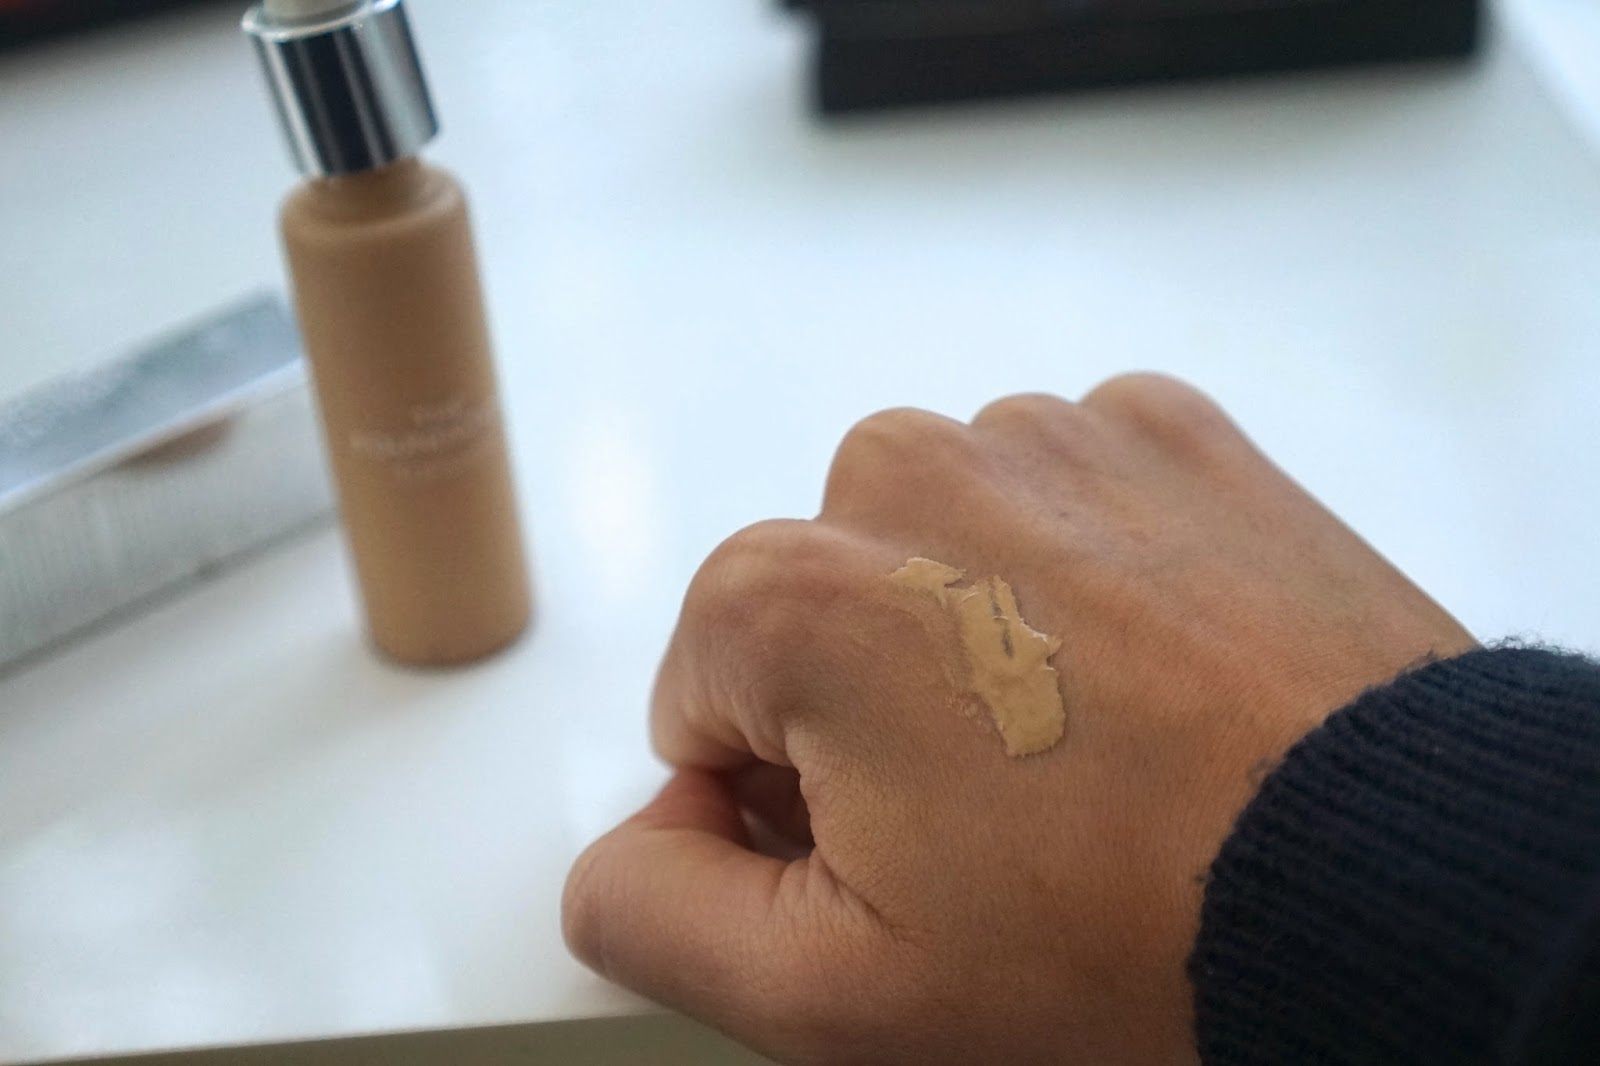 the foundation topshop swatch